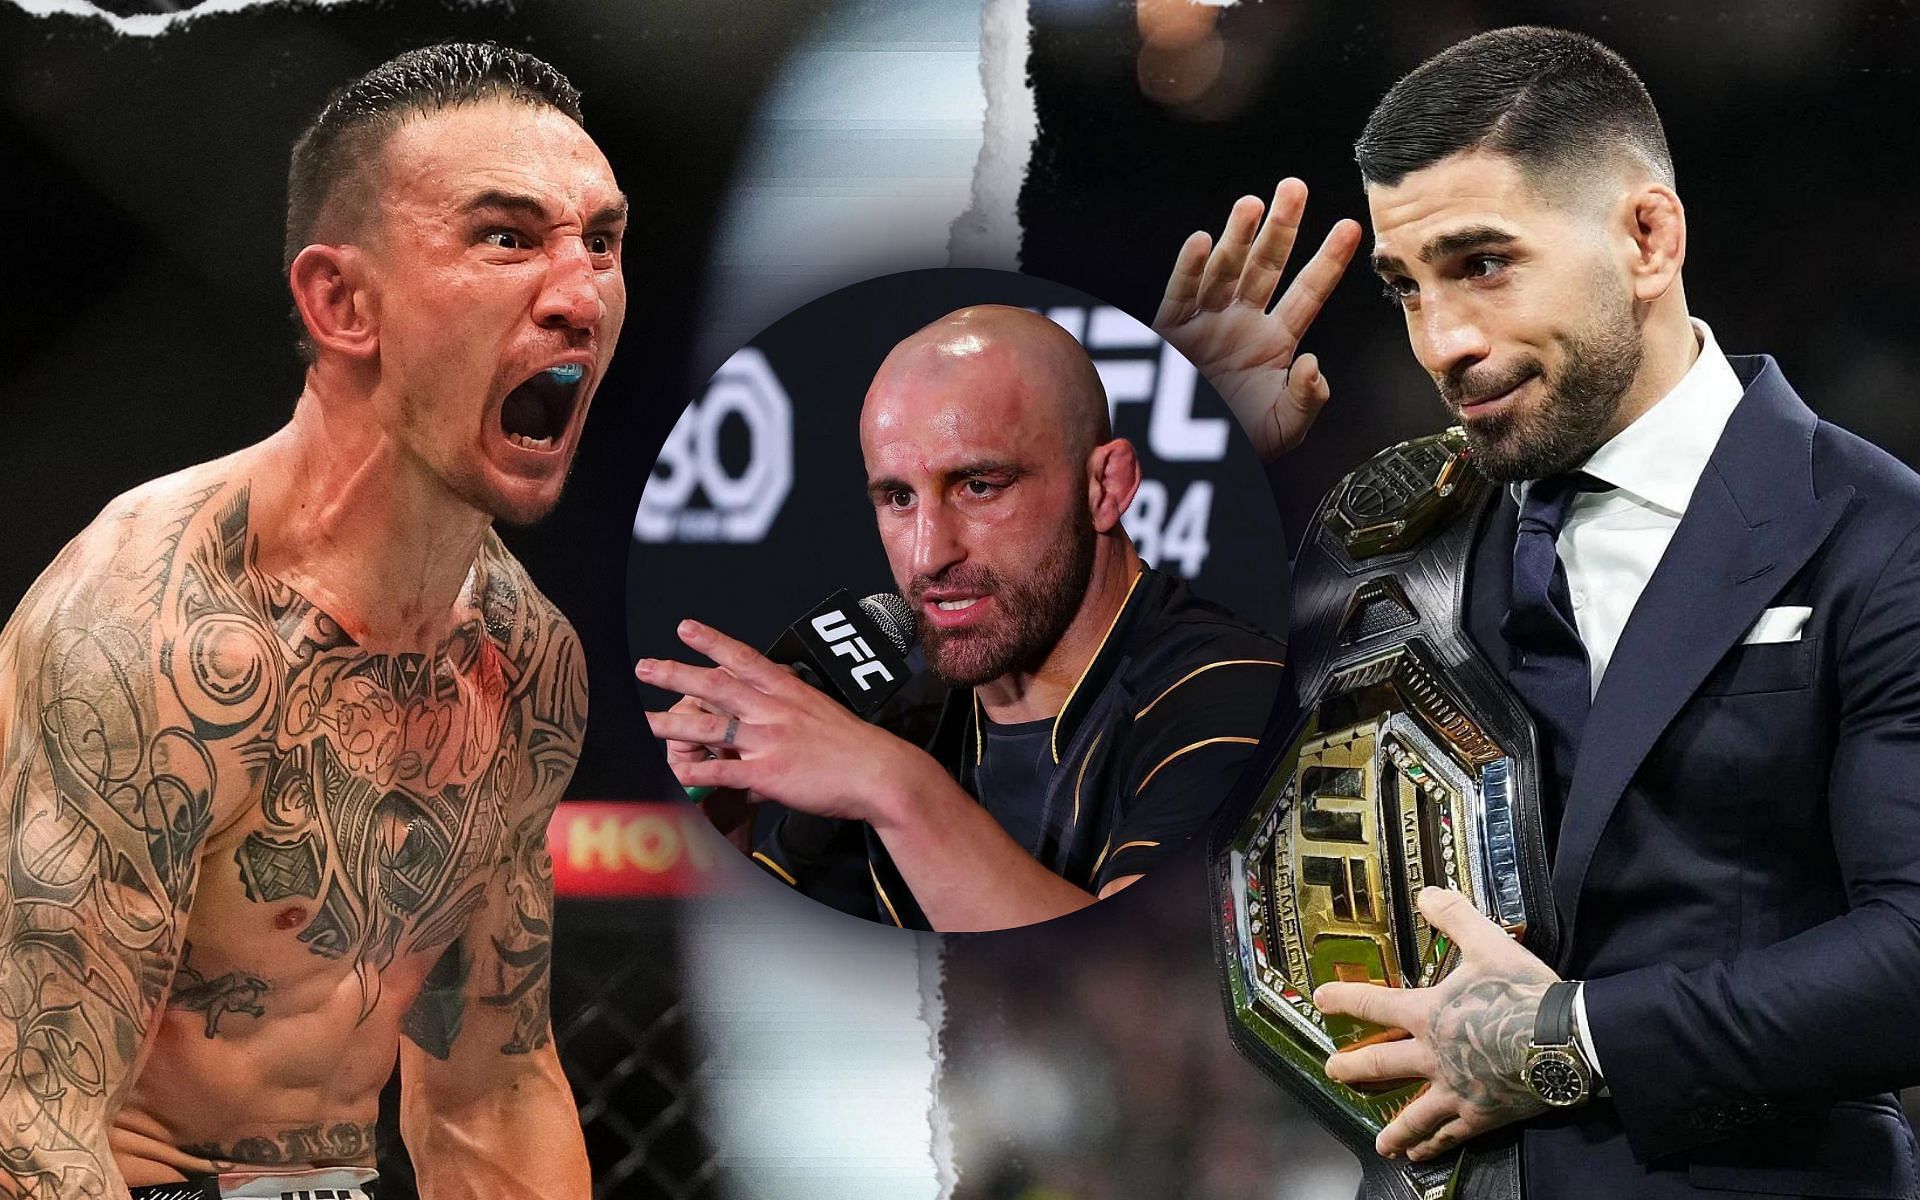 Alexander Volkanovski (inset) weighs in on a potential Max Holloway (left) vs. Ilia Topuria (right) fight. [Image courtesy: Getty Images]